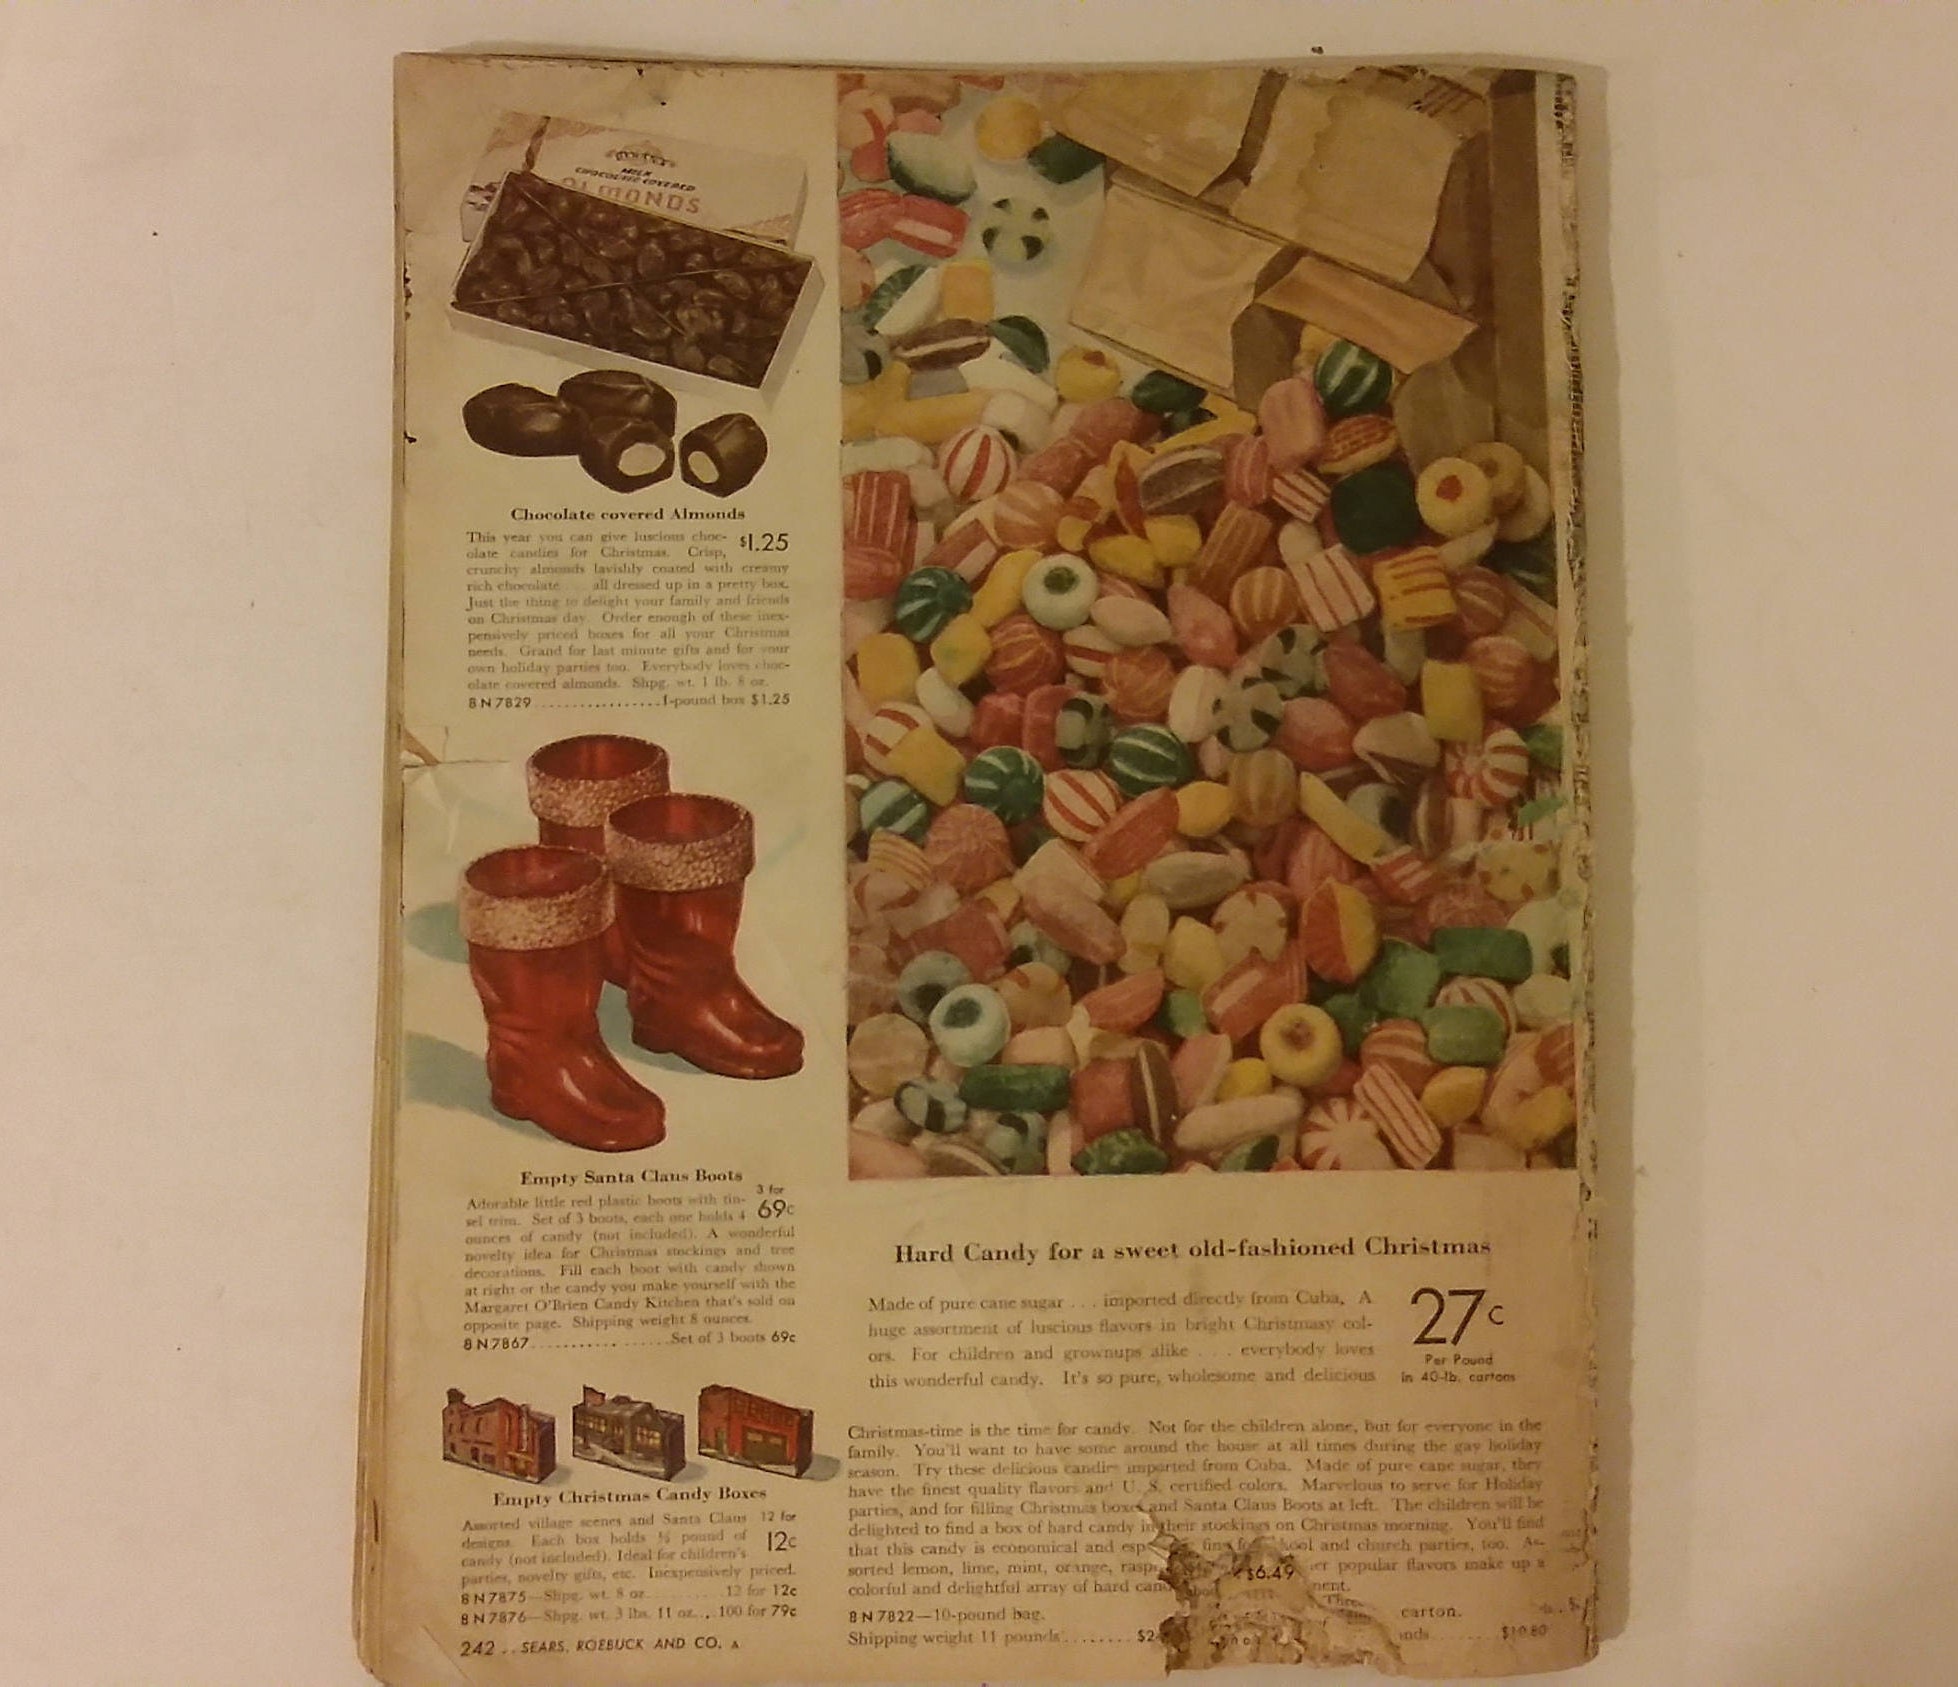 Sears and Roebuck Co. Merry Christmas Catalog, Dolls-Toys-Xmas Gifts, 1946